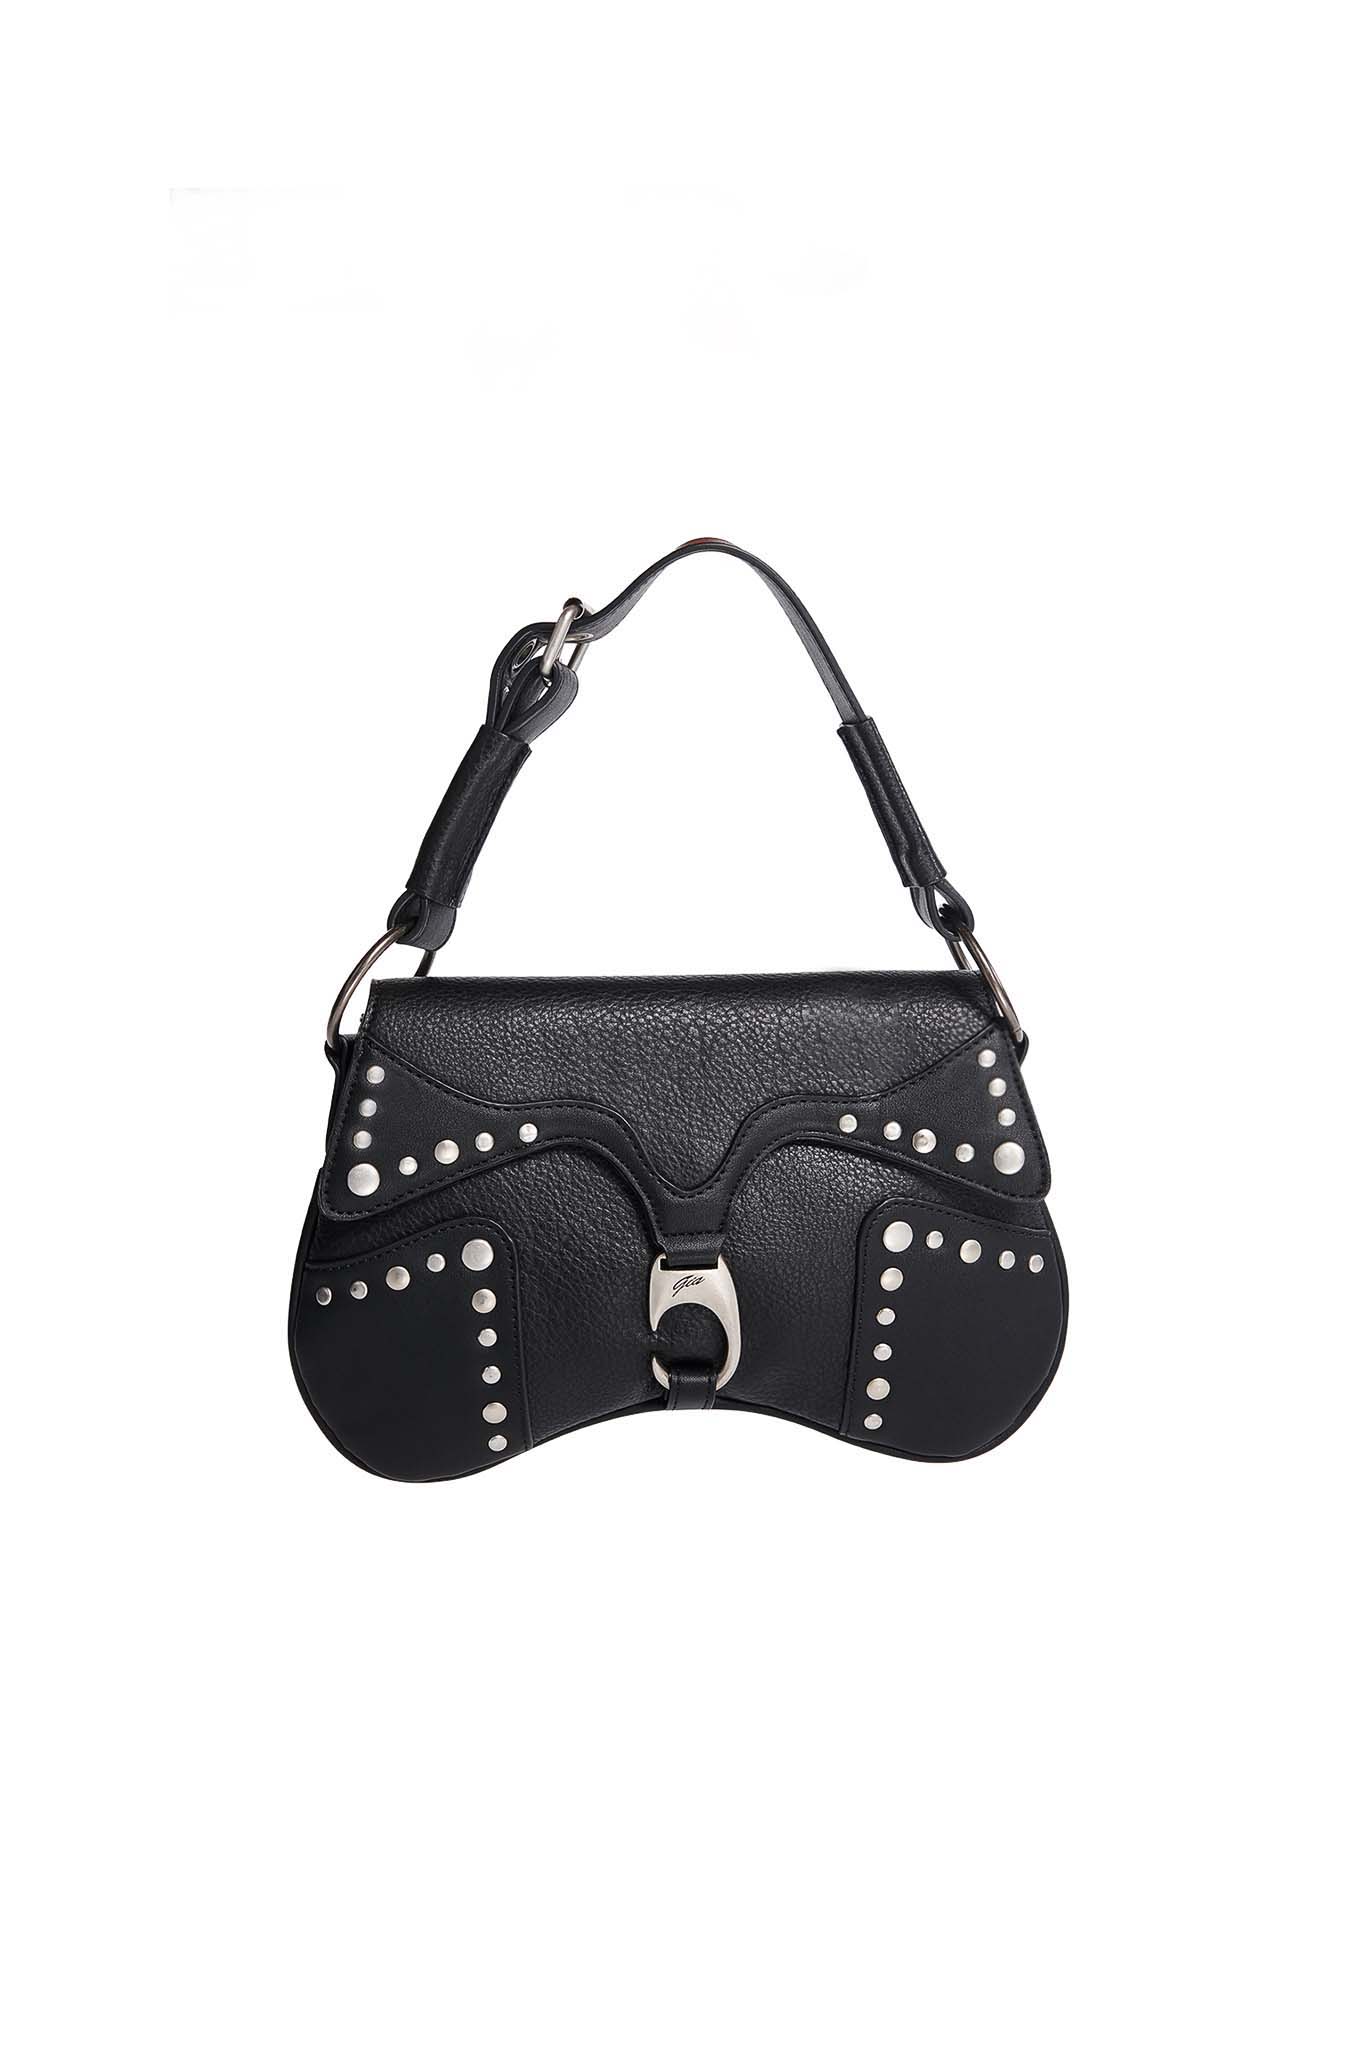 Buy UTO Women Skull Tote Bag PU Washed Leather Rivet Studded Ladies Purse  Shoulder Bag at Amazon.in